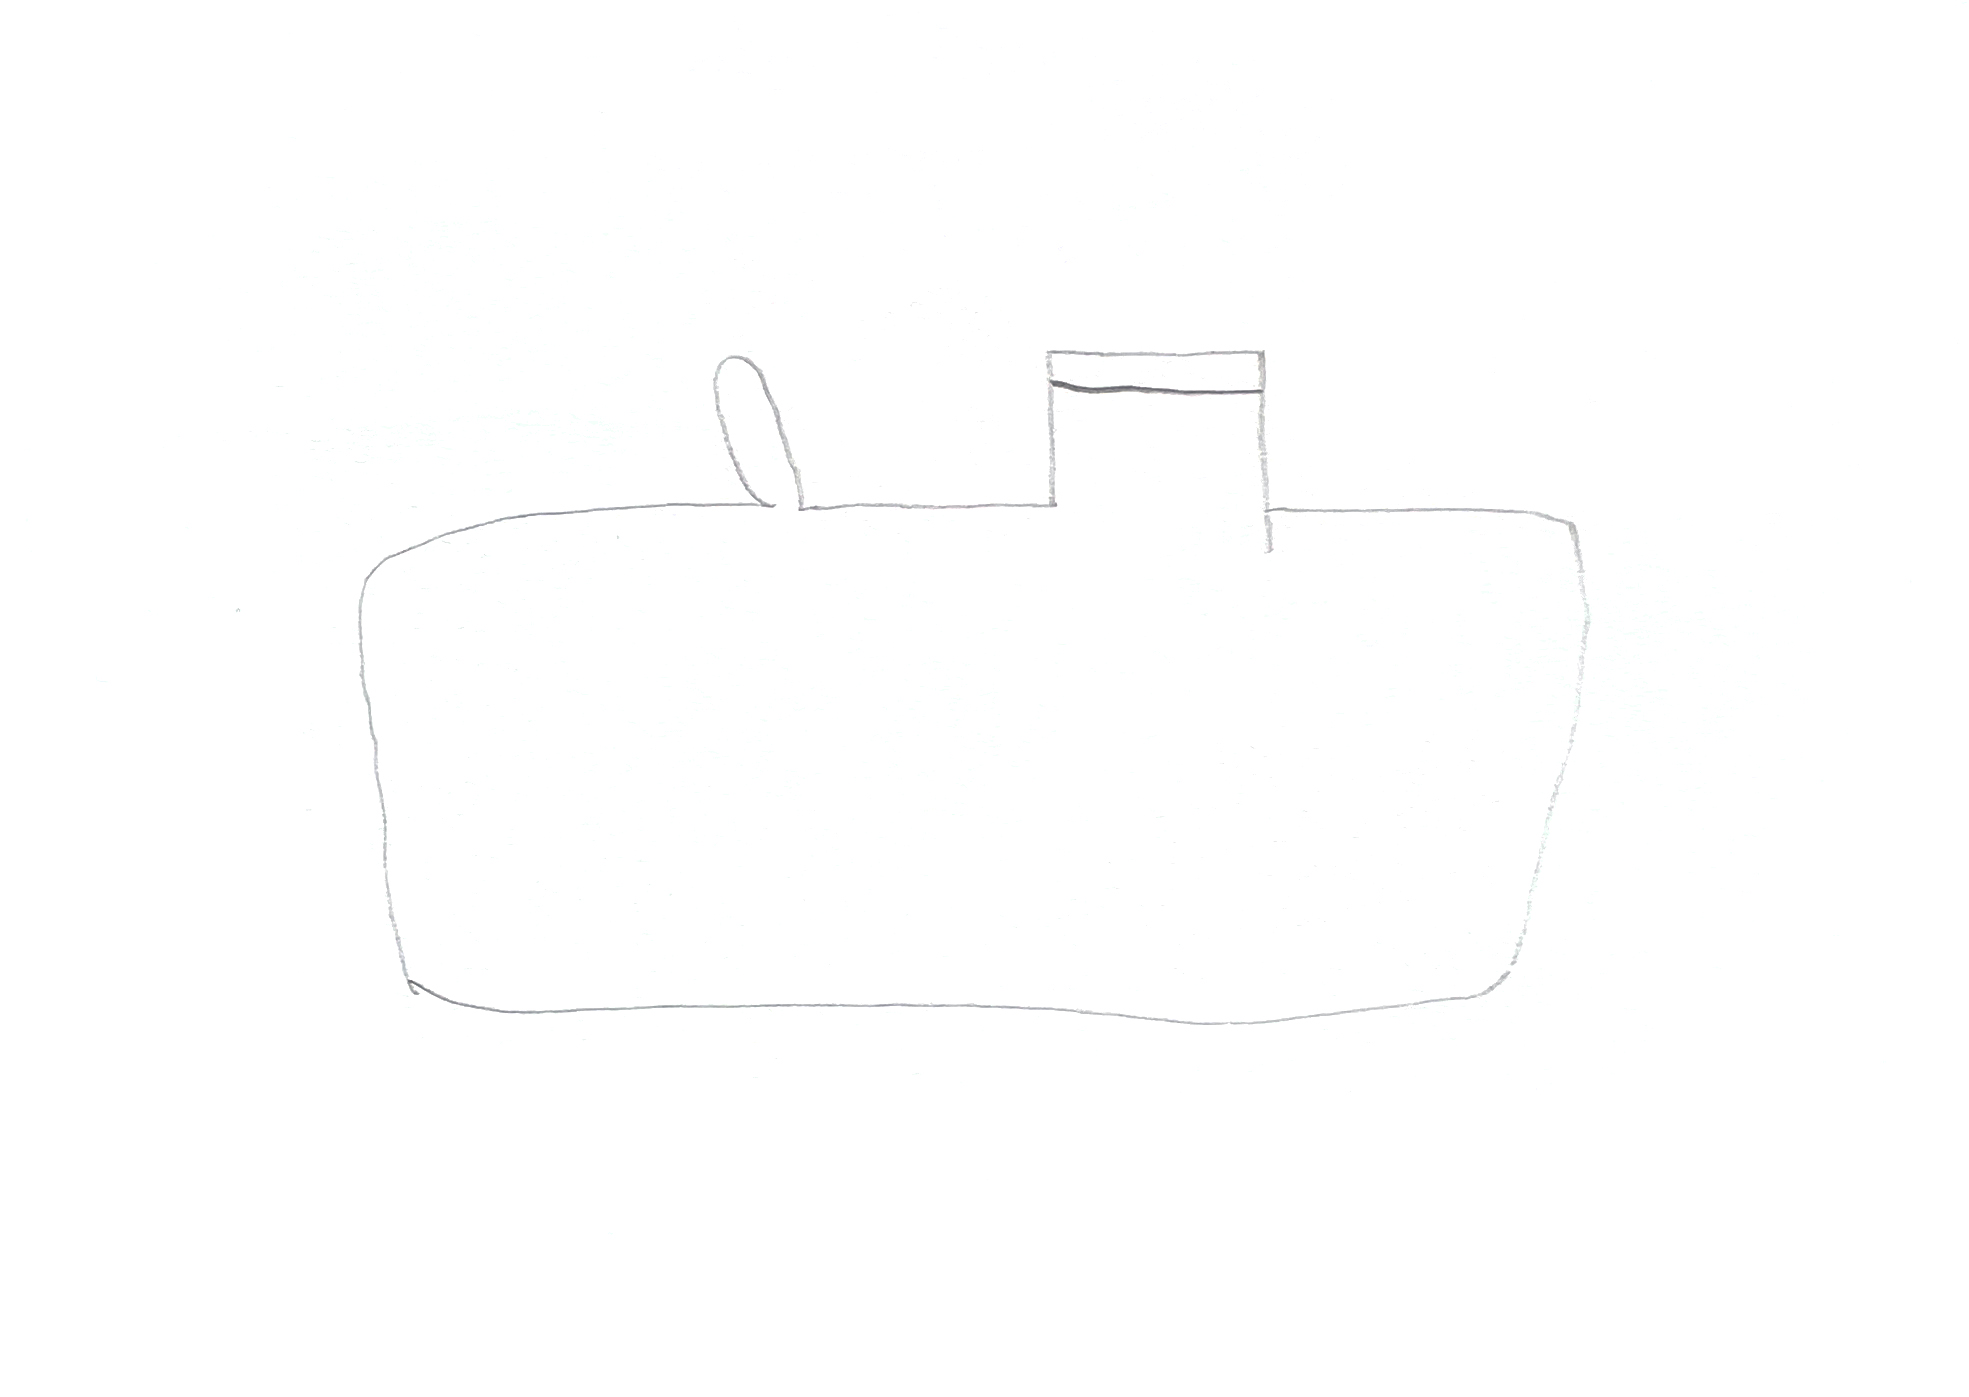 pencil drawing of a funky boat shape